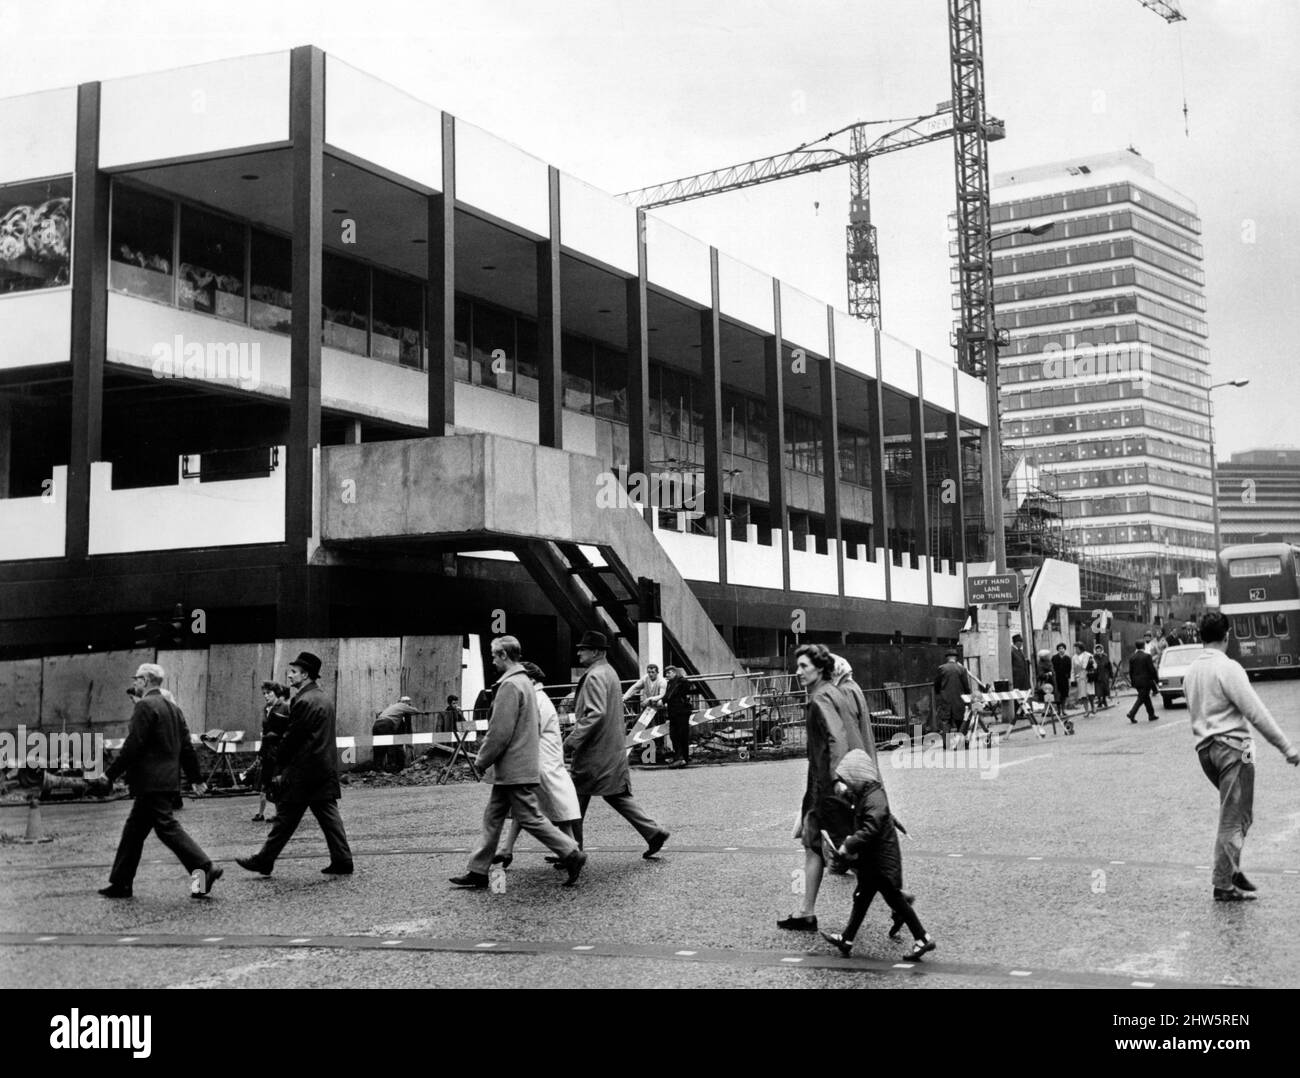 St Johns Shopping Centre, Under Construction, Liverpool, 27th settembre 1968. Foto Stock